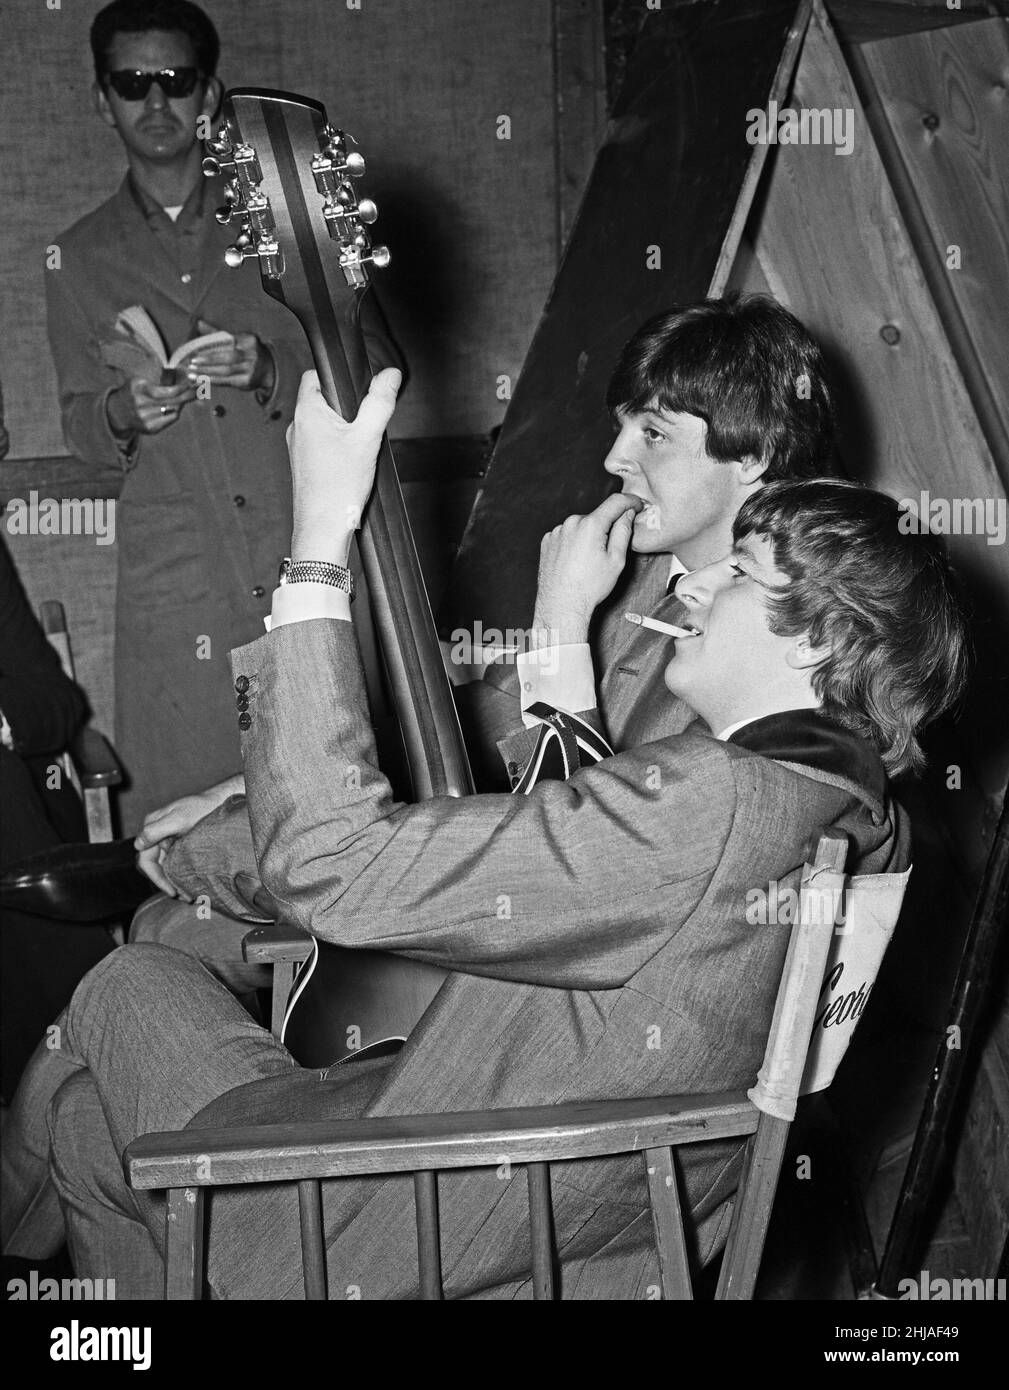 The Beatles pose for pictures during filming of A Hard Day's Night at Madame Tussauds in London.(Picture shows) Ringo Starr and Paul McCartney posing with a guitar. 12th March 1964. Stock Photo